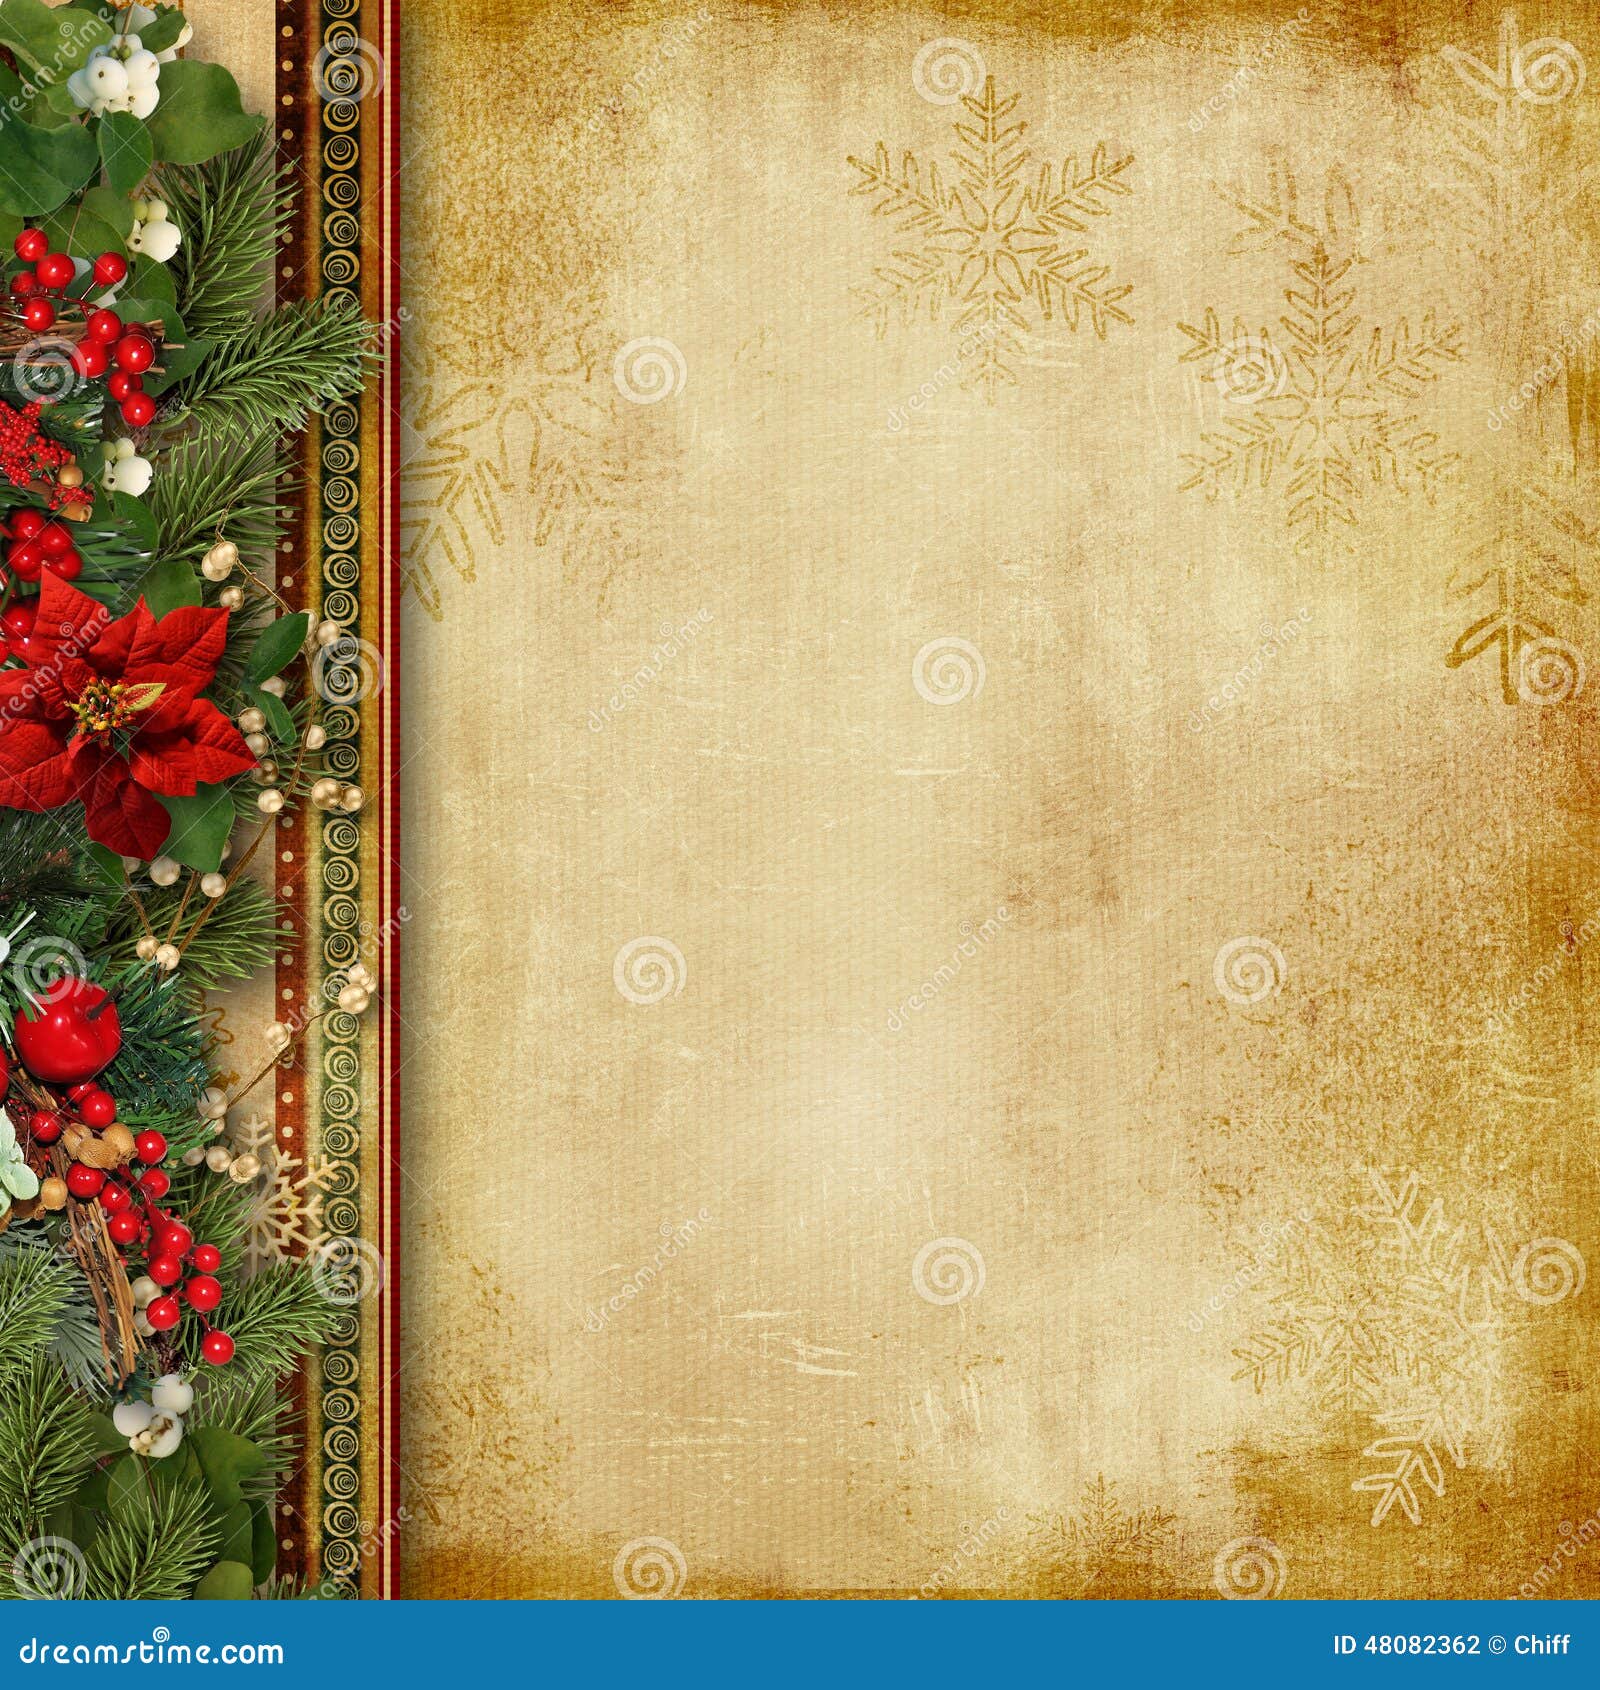 vintage christmas background with holly and firtree